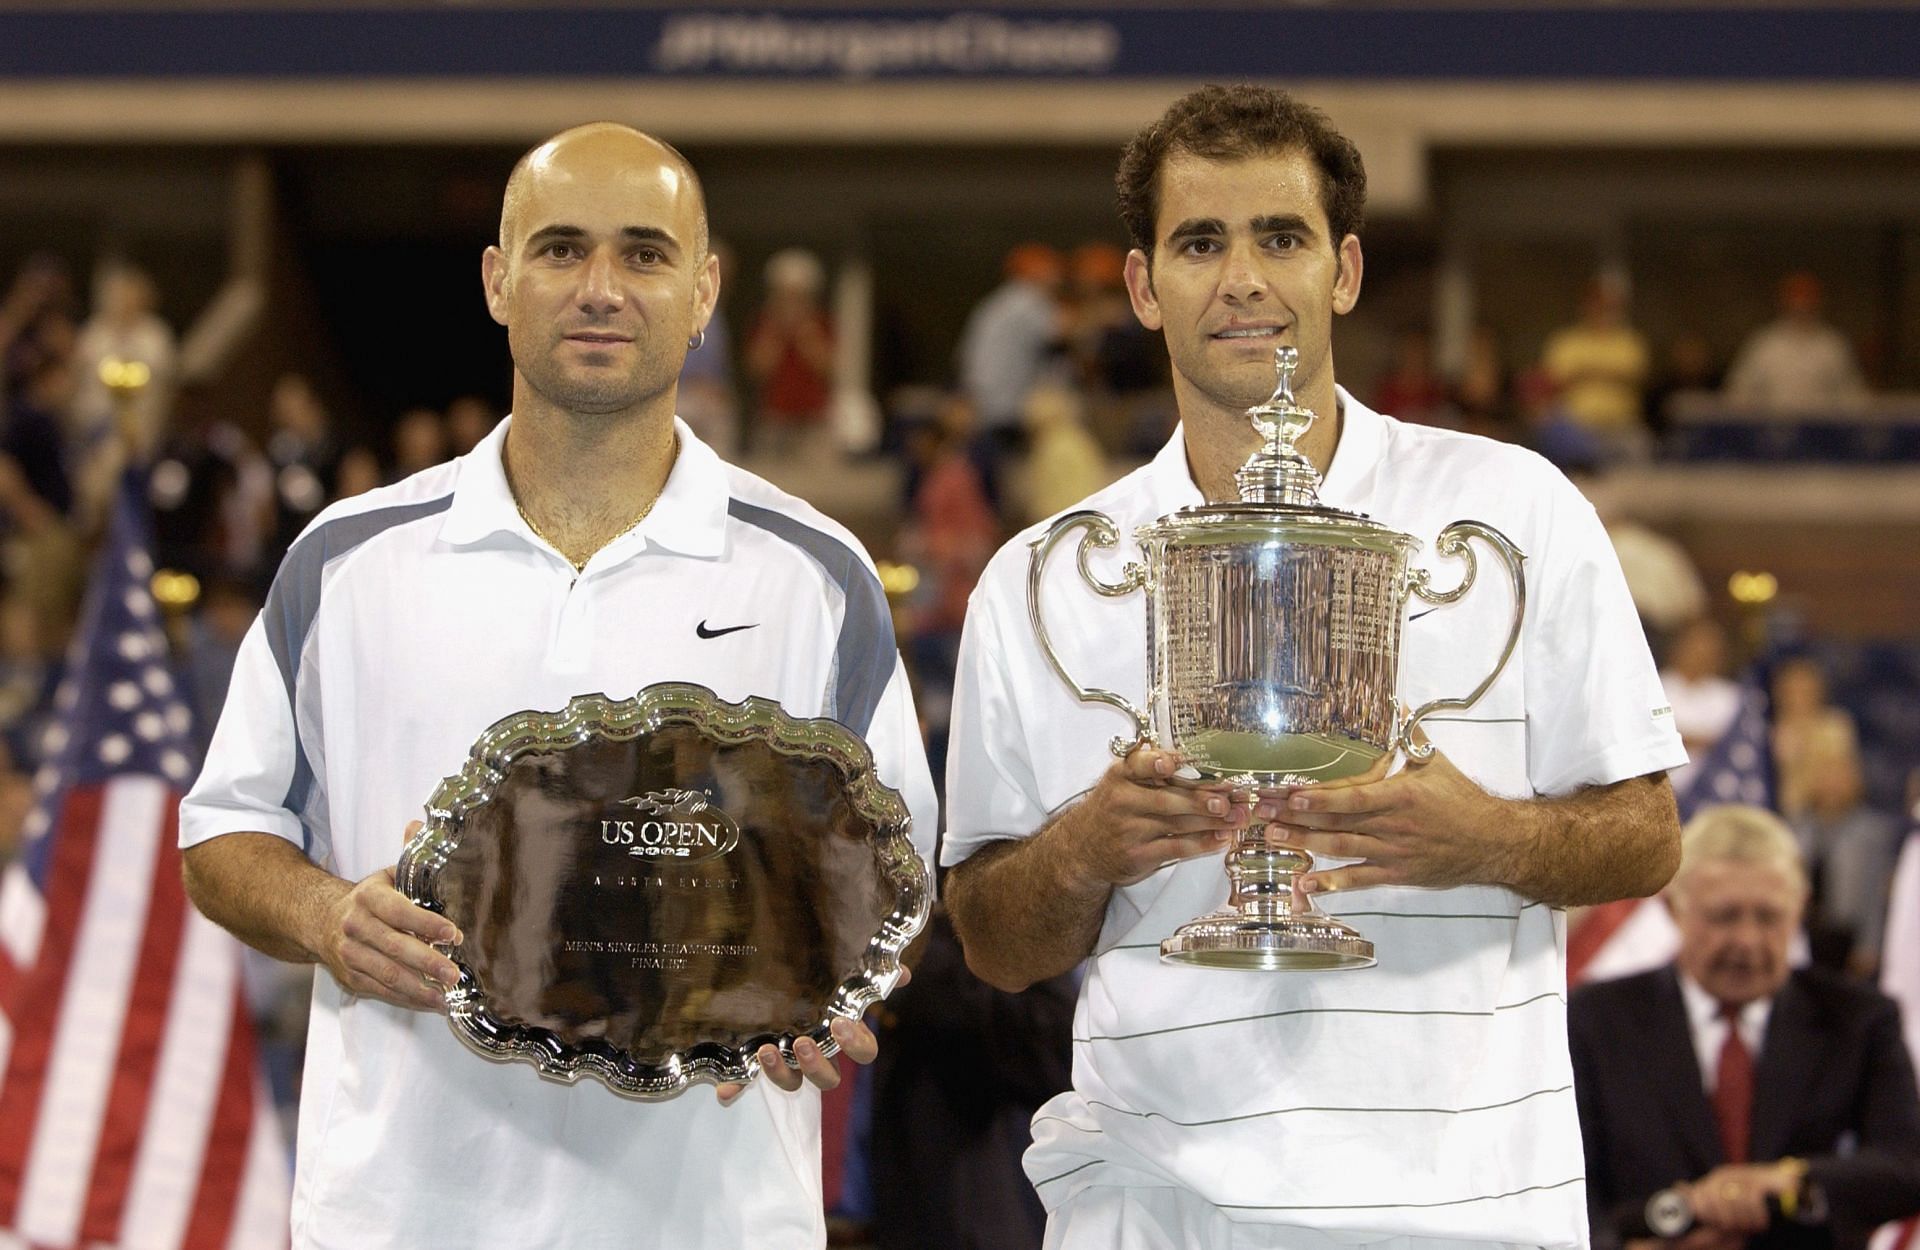 Pete Sampras beat Andre Agassi in the 2002 US Open final